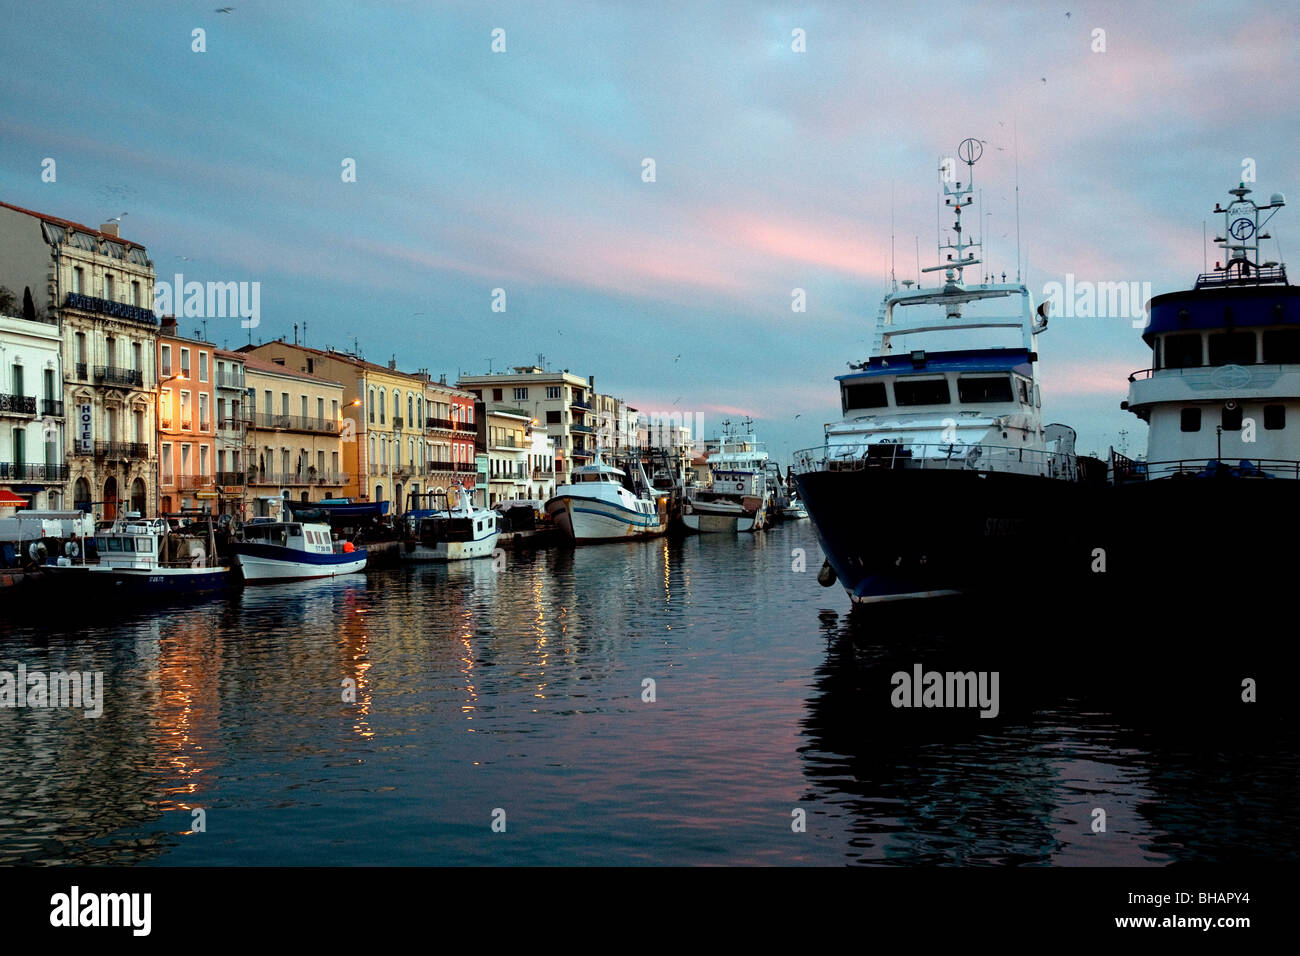 In Sète. France's largest Mediterranean fishing port, buildings glow at sunset beside trawlers moored in the Royal Canal Stock Photo